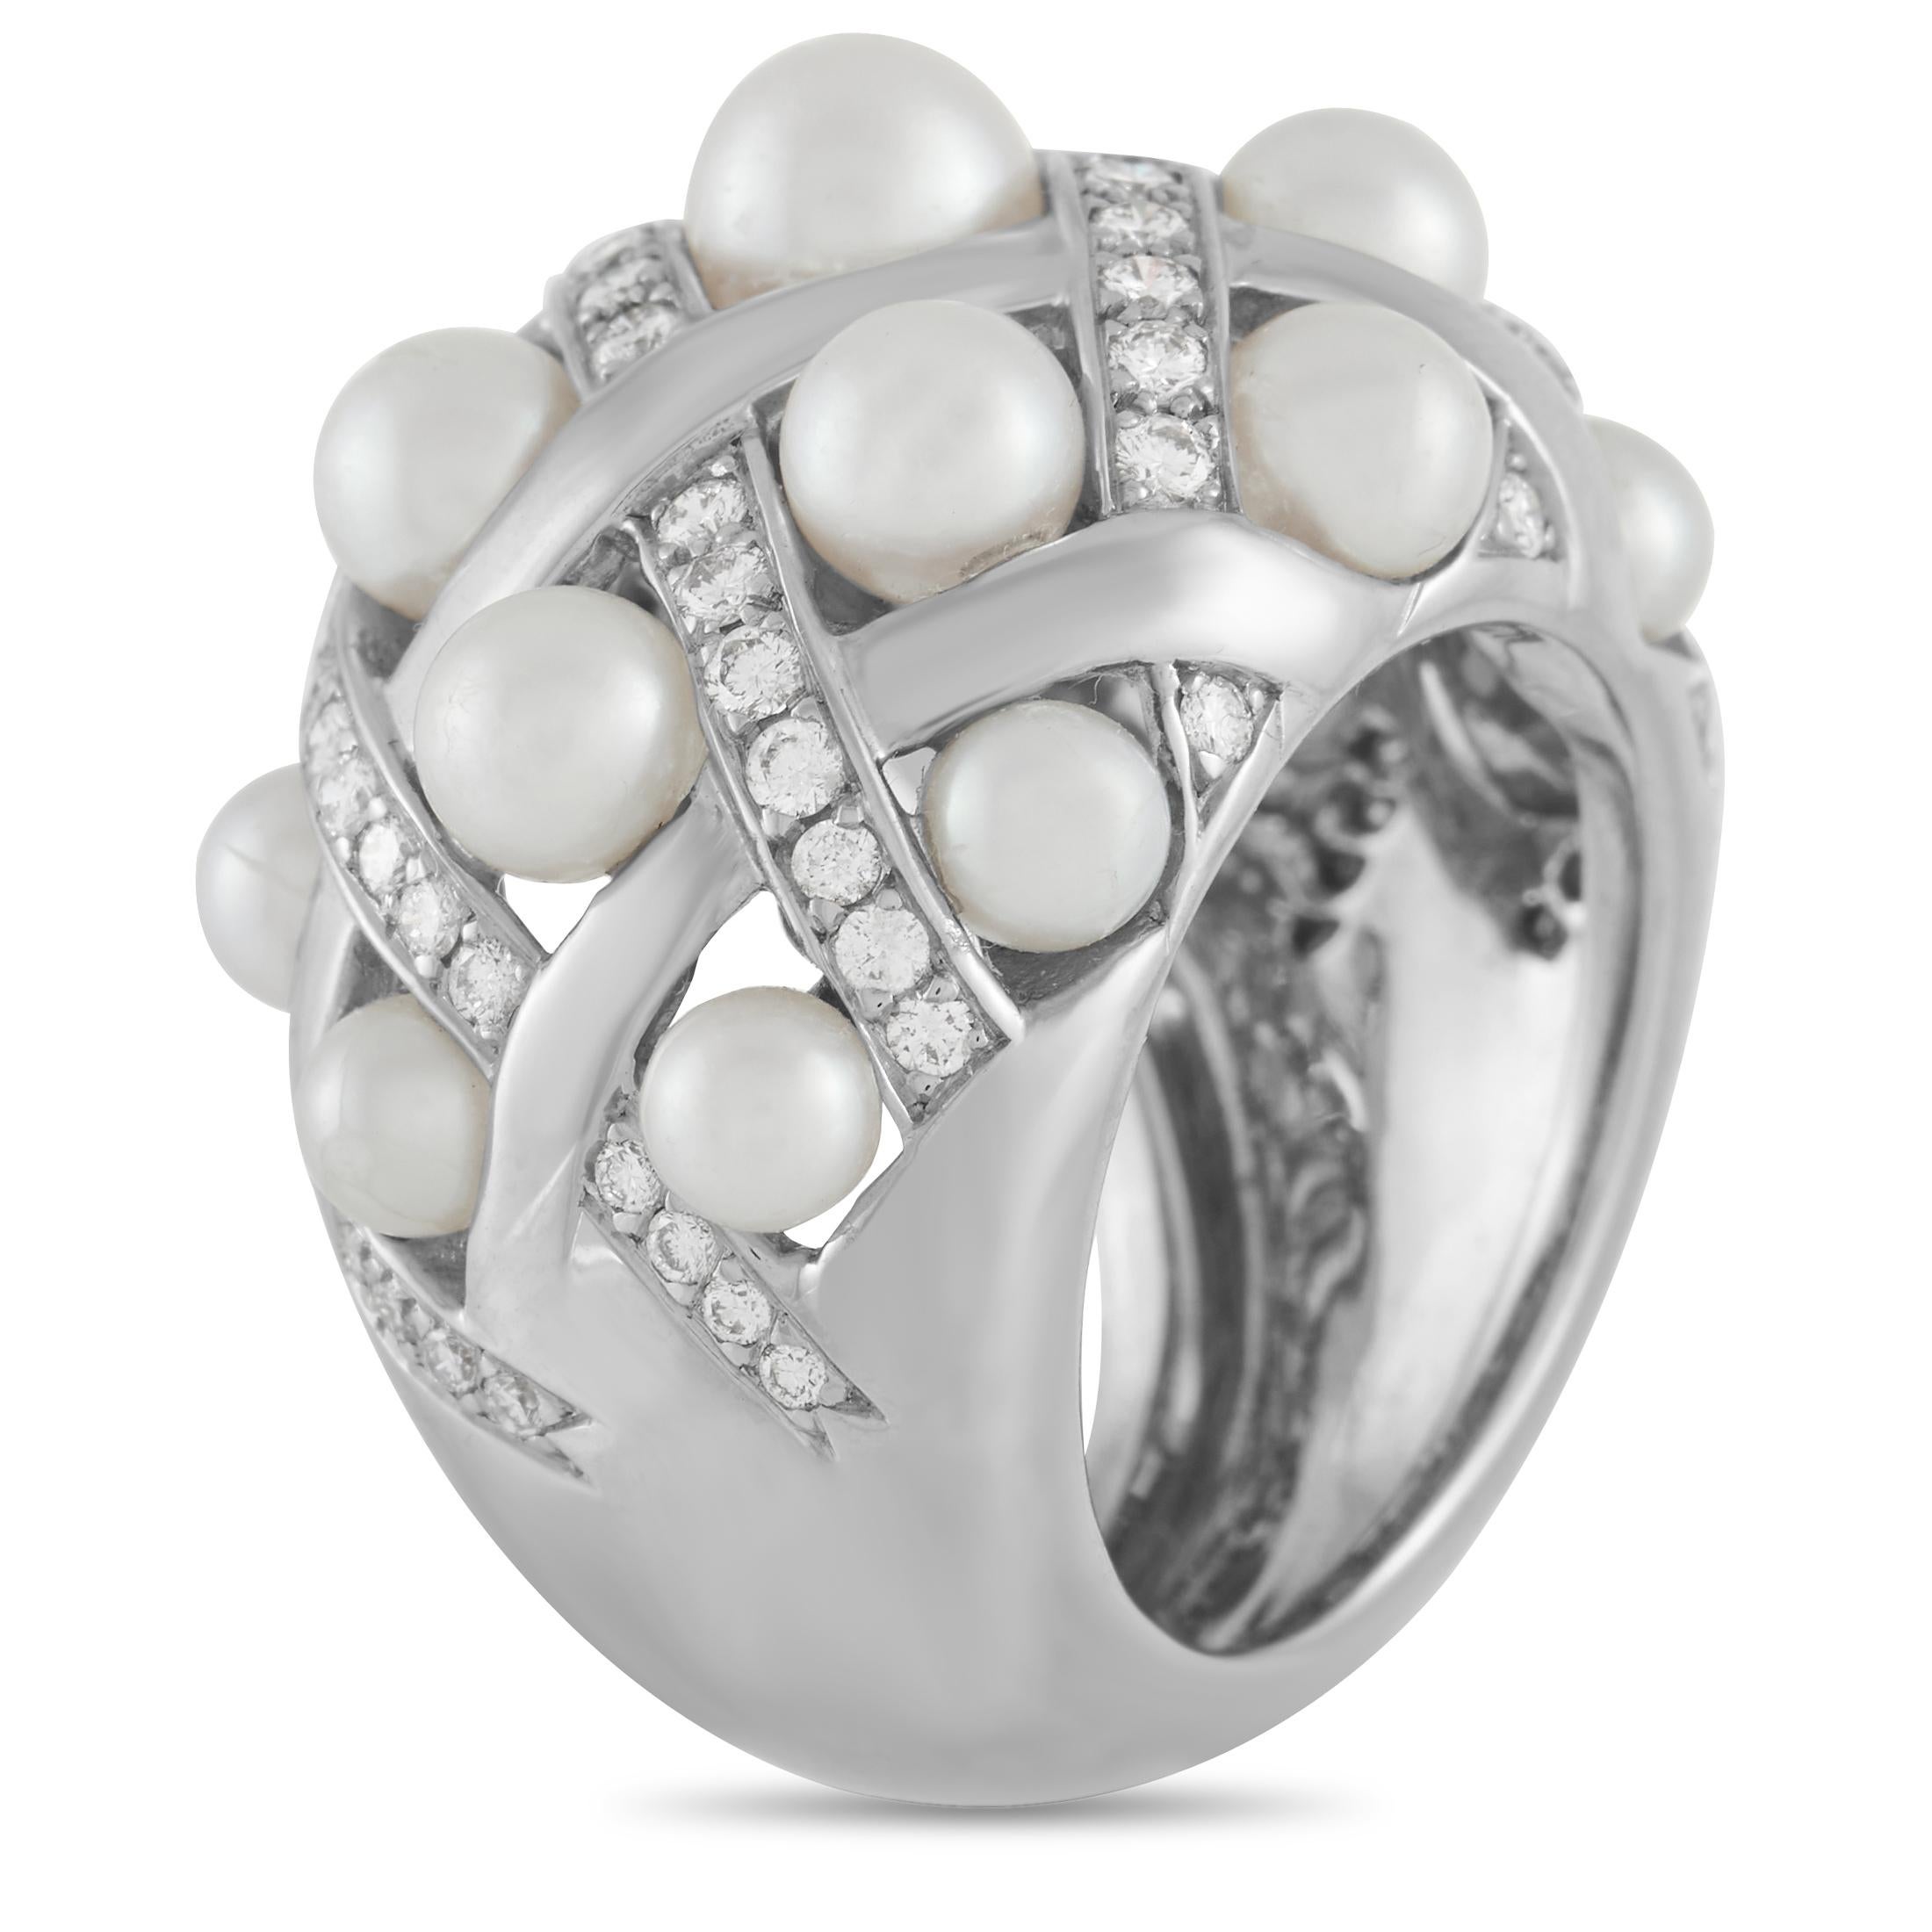 Shimmering 18K white gold metal in a chic lattice pattern provides the perfect foundation for this bold, breathtaking ring from Chanel. It’s accented by an array of lustrous pearls and 0.75 carats of glittering diamonds with E color and VVS clarity.